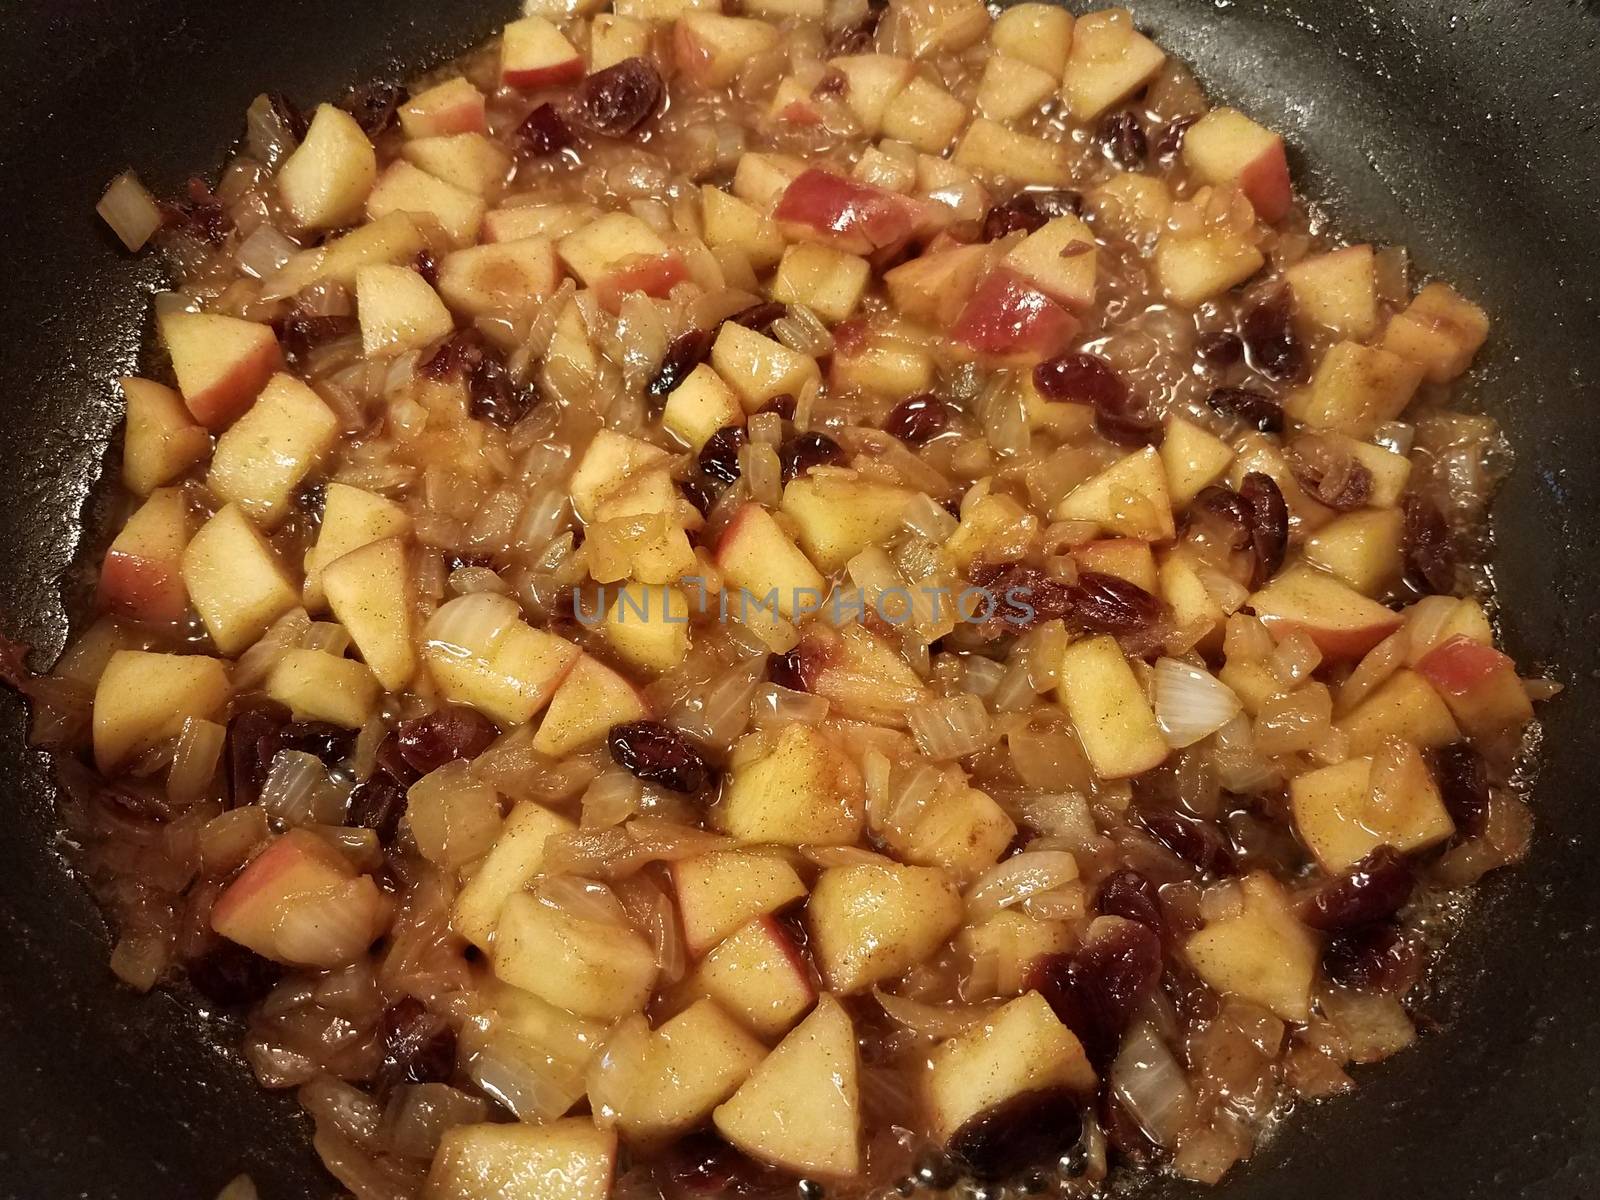 apples and cranberries and sauce cooking in a frying pan by stockphotofan1